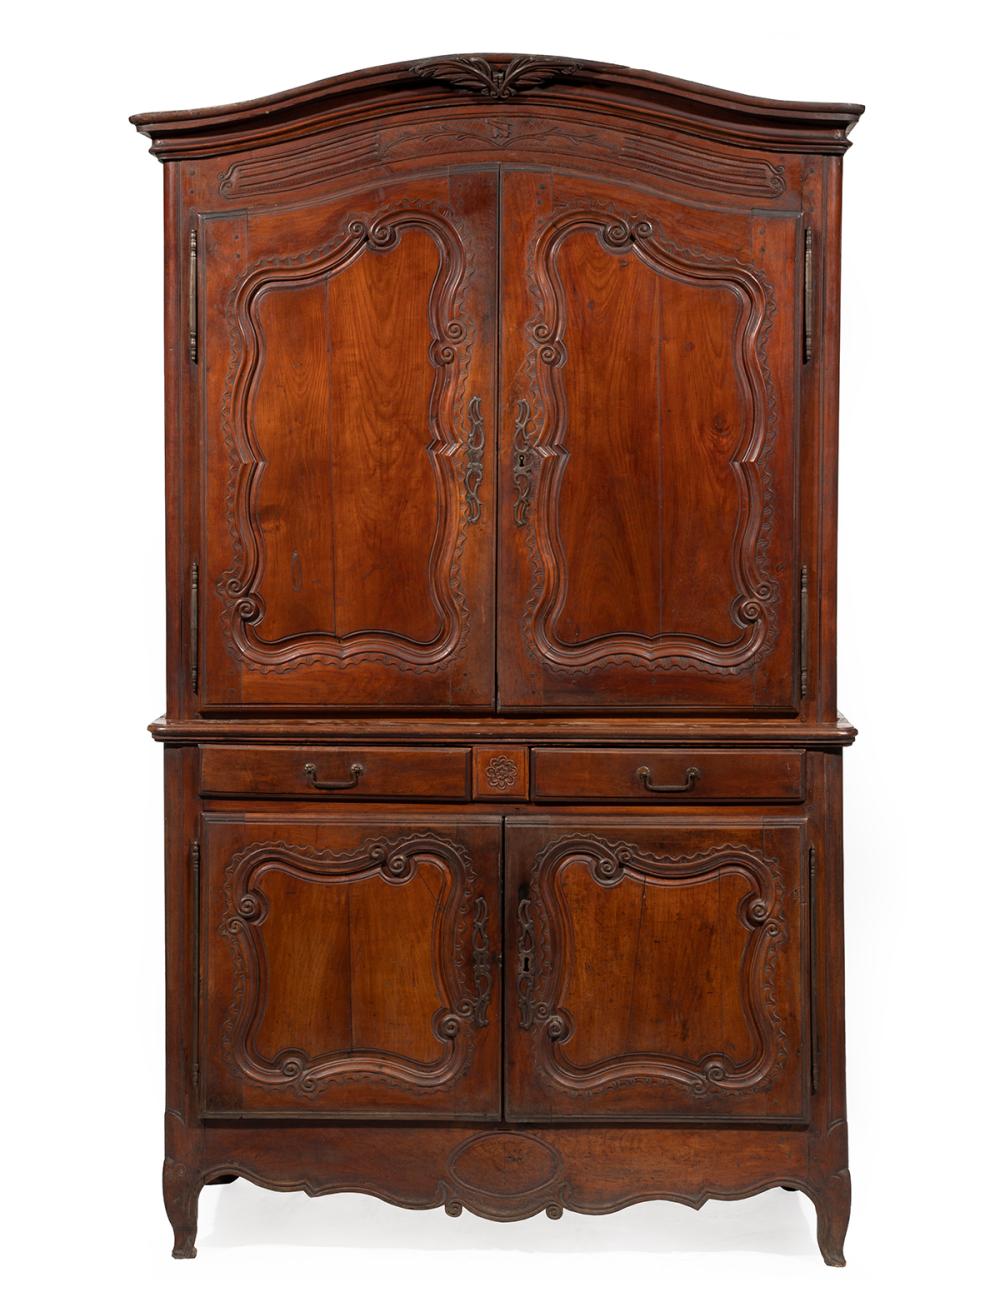 FRENCH CARVED WALNUT BUFFET A DEUX 2e3130